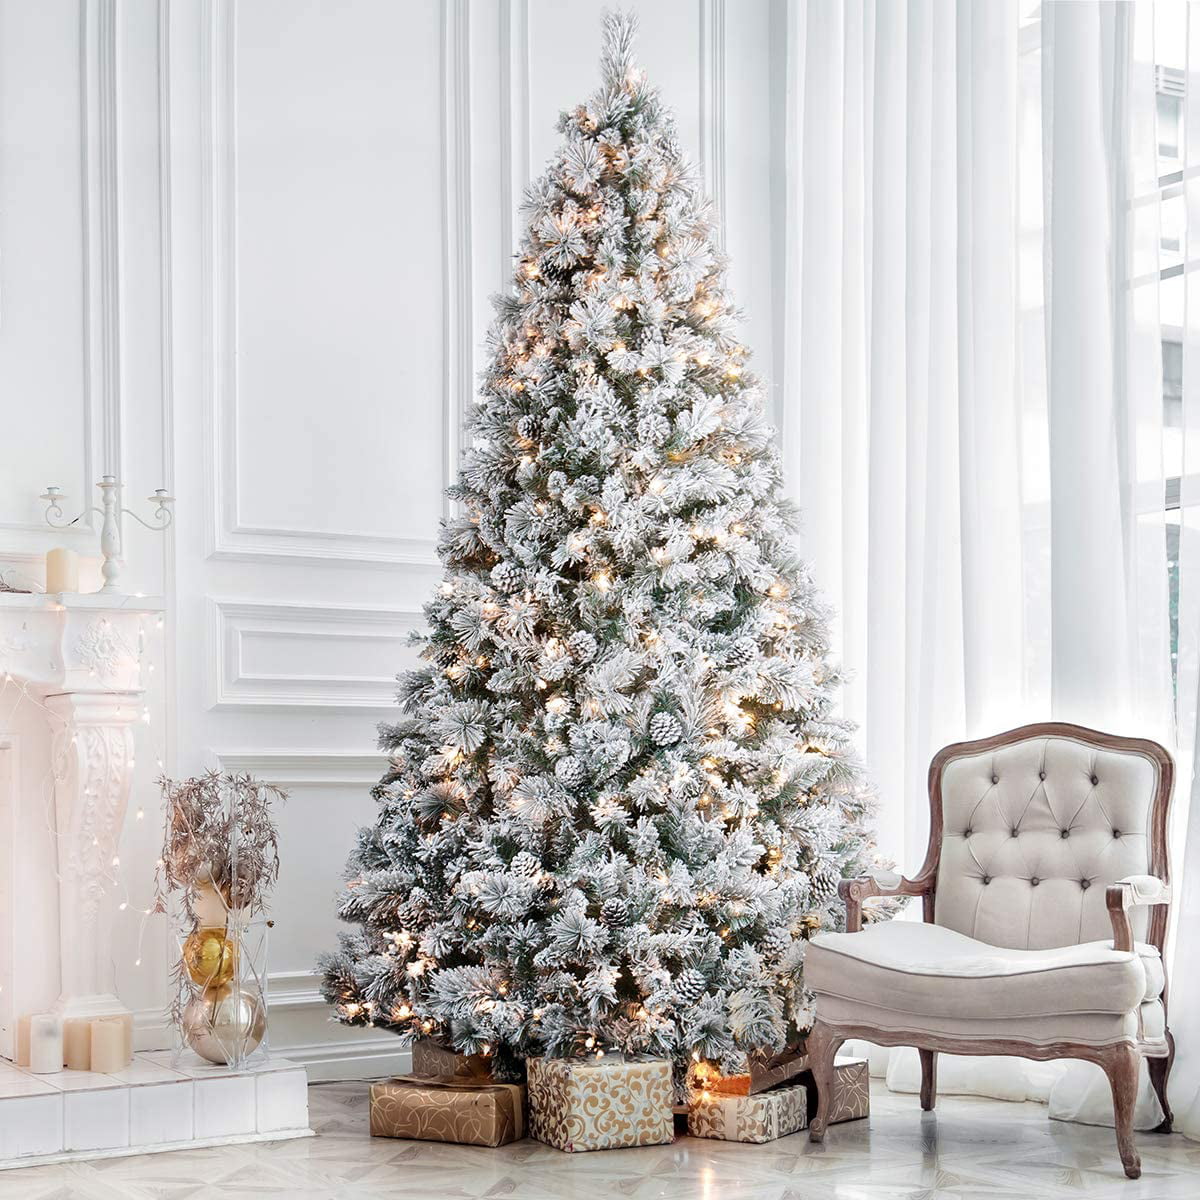 7.5ft PreLit Snow Flocked Hinged Christmas Tree, Feel Real, Holiday Decor with 400 Warm White